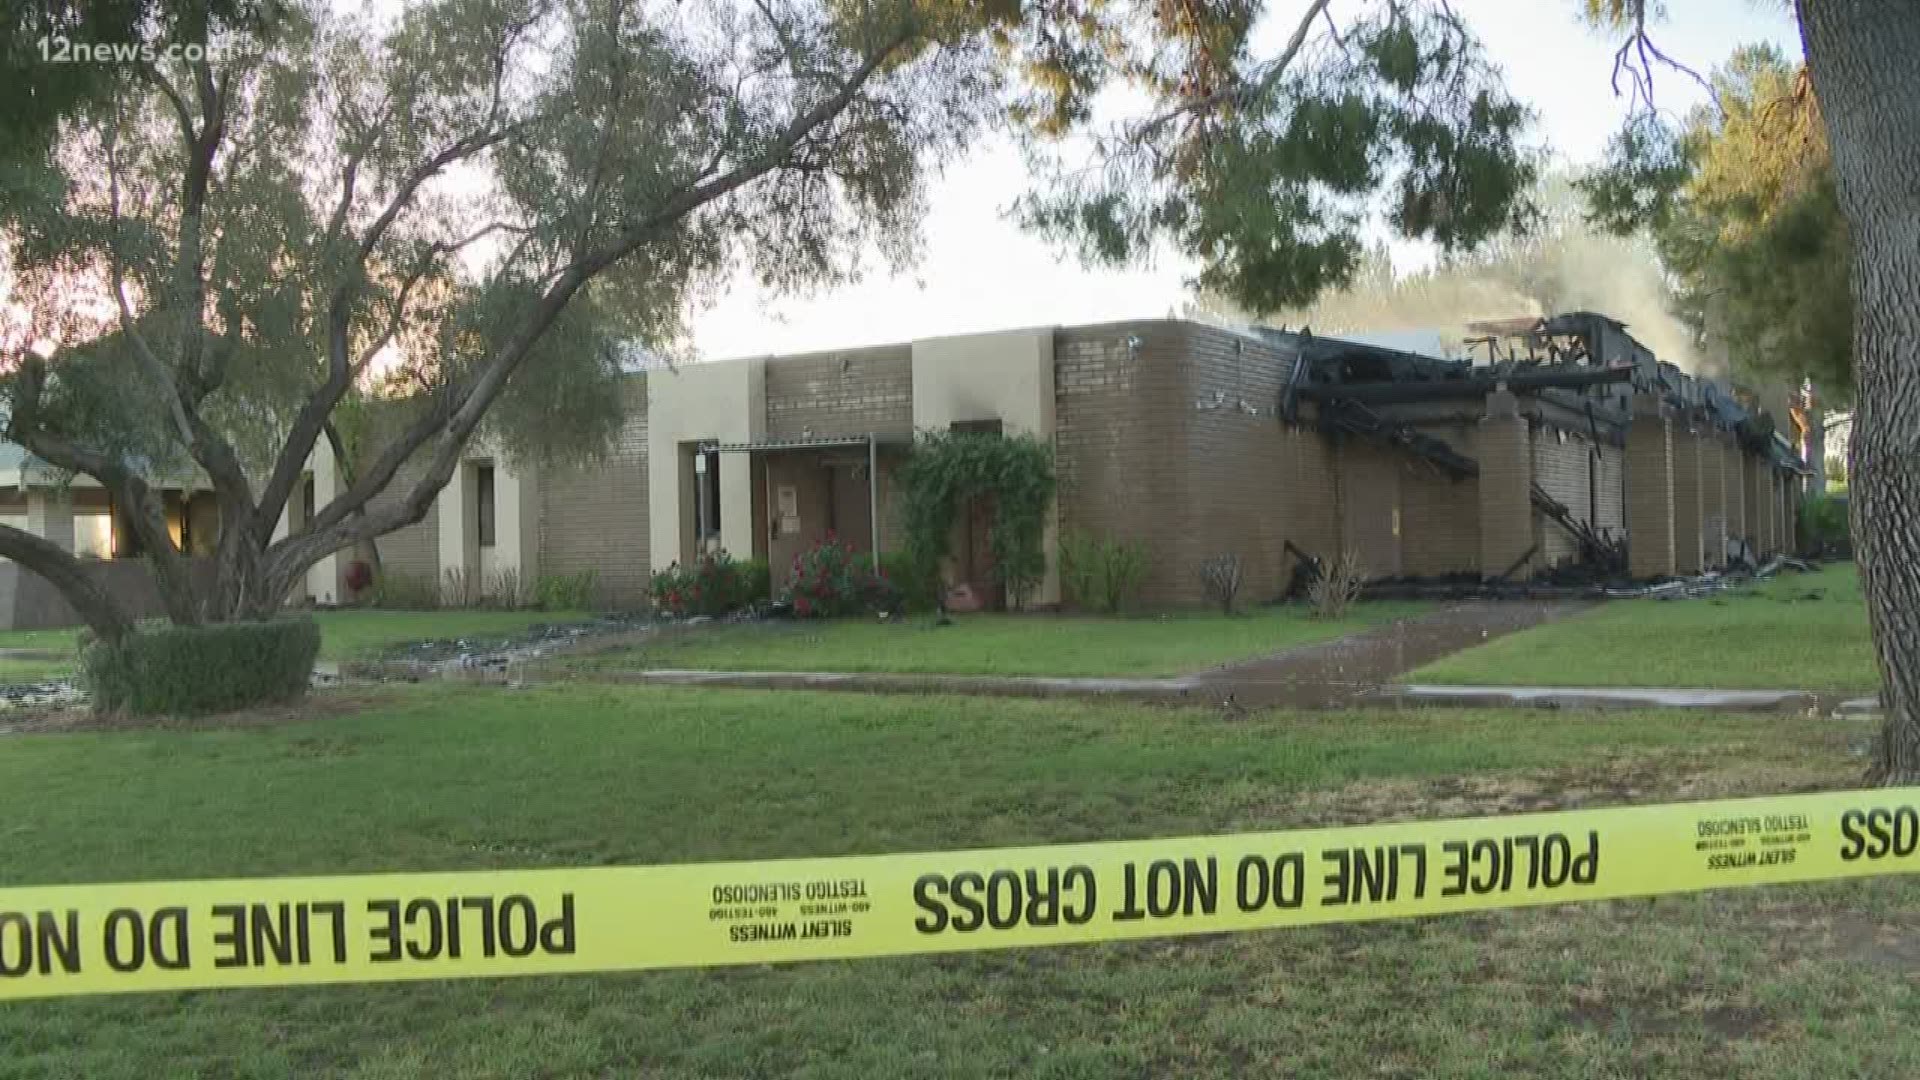 A large fire which burned overnight Wednesday destroyed the St. Joseph Catholic Church in north Phoenix.